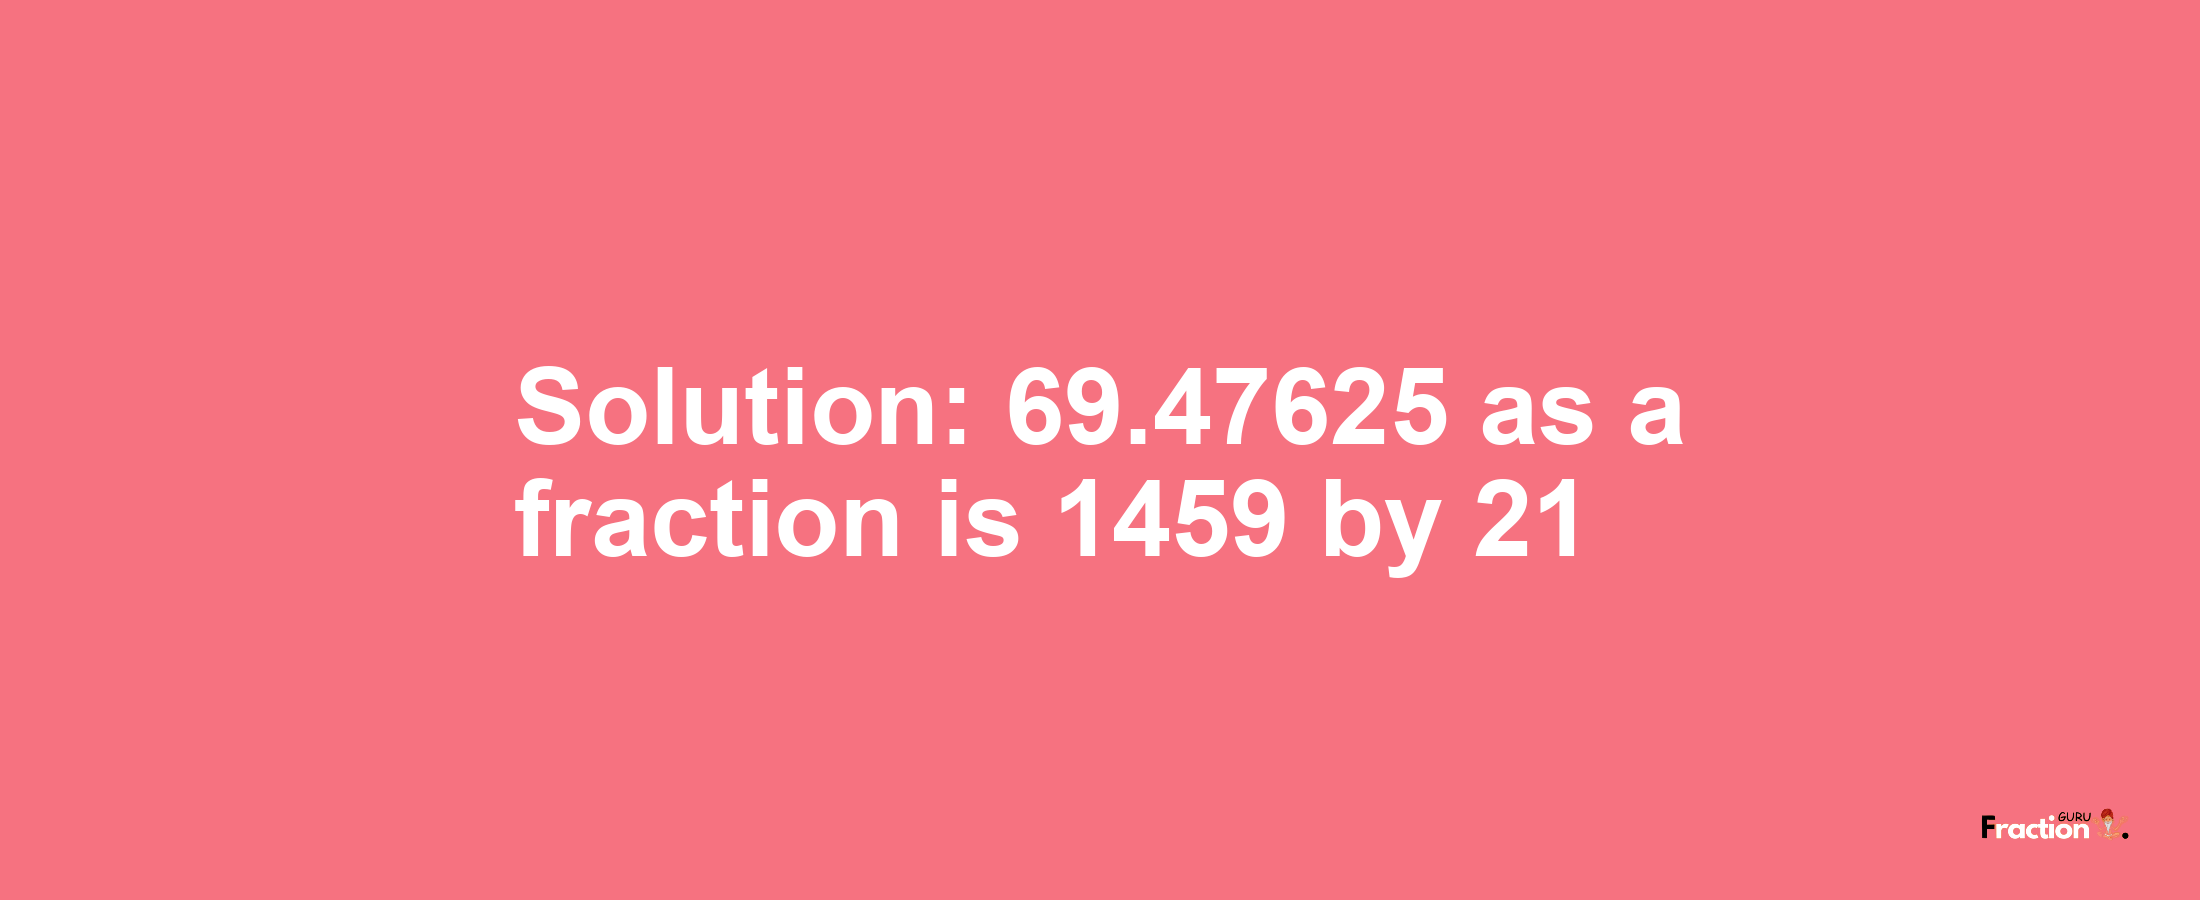 Solution:69.47625 as a fraction is 1459/21